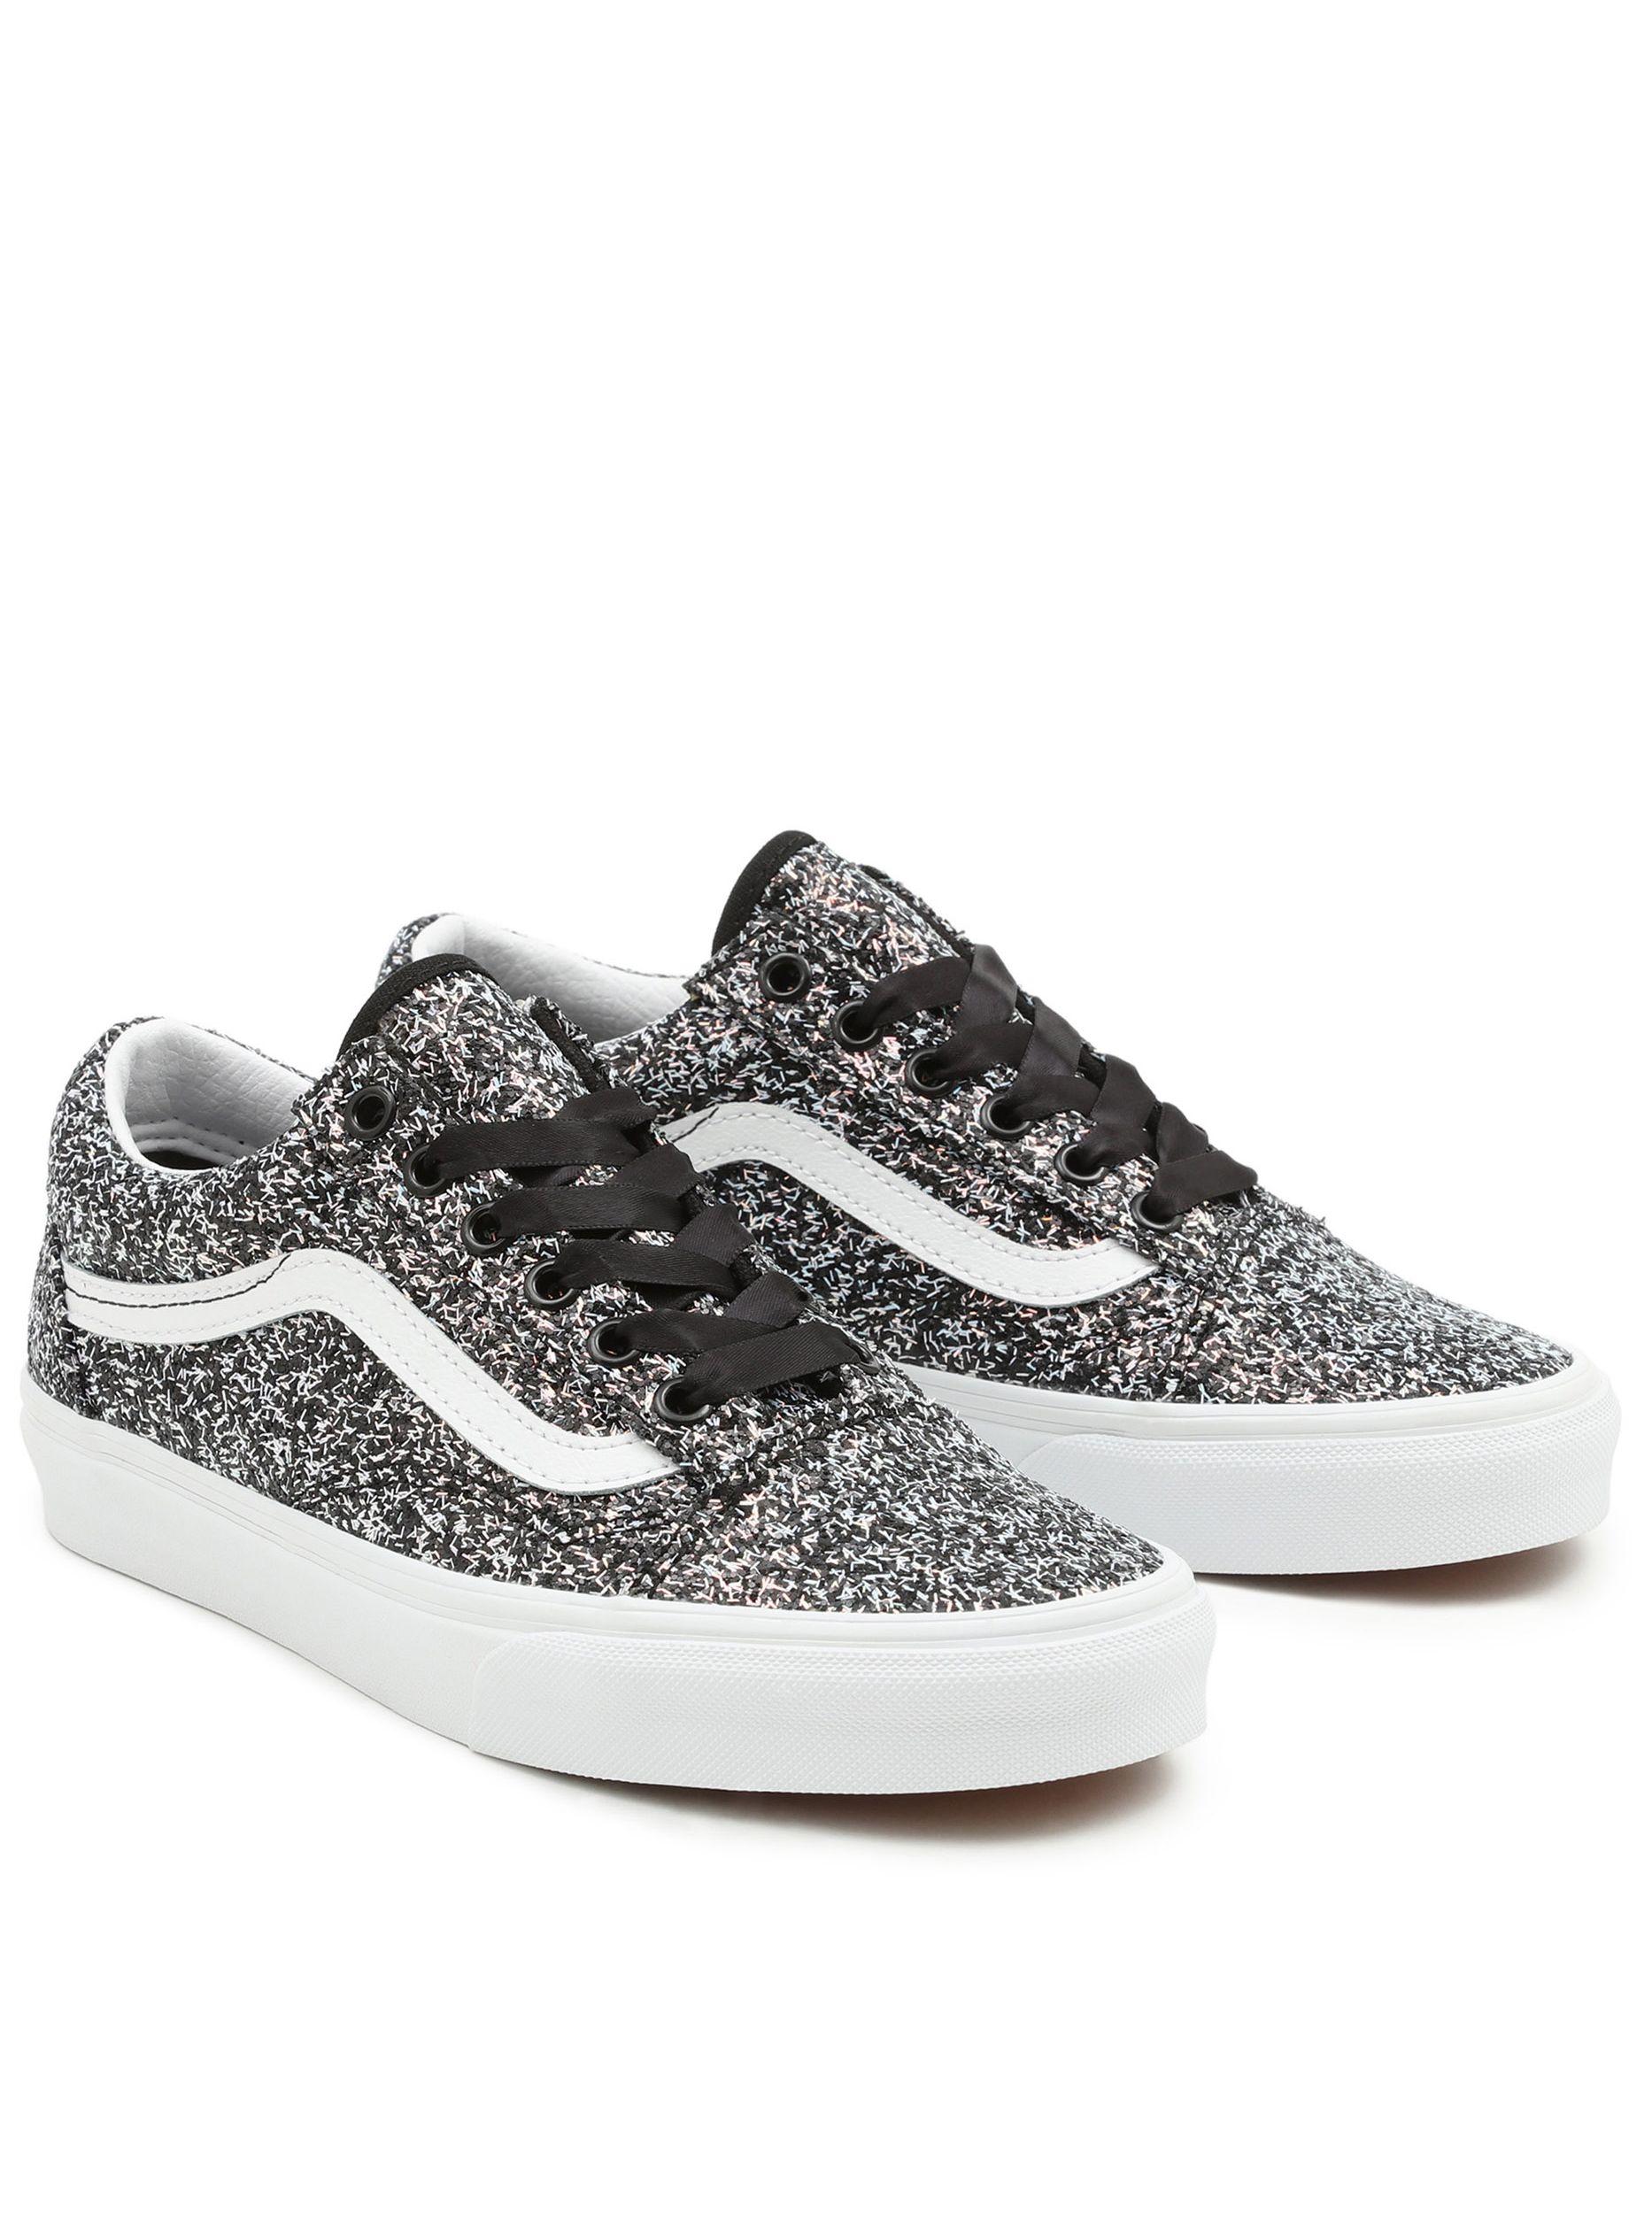 Vans Shiny Party Old Skool Shoes in Gray | Lyst